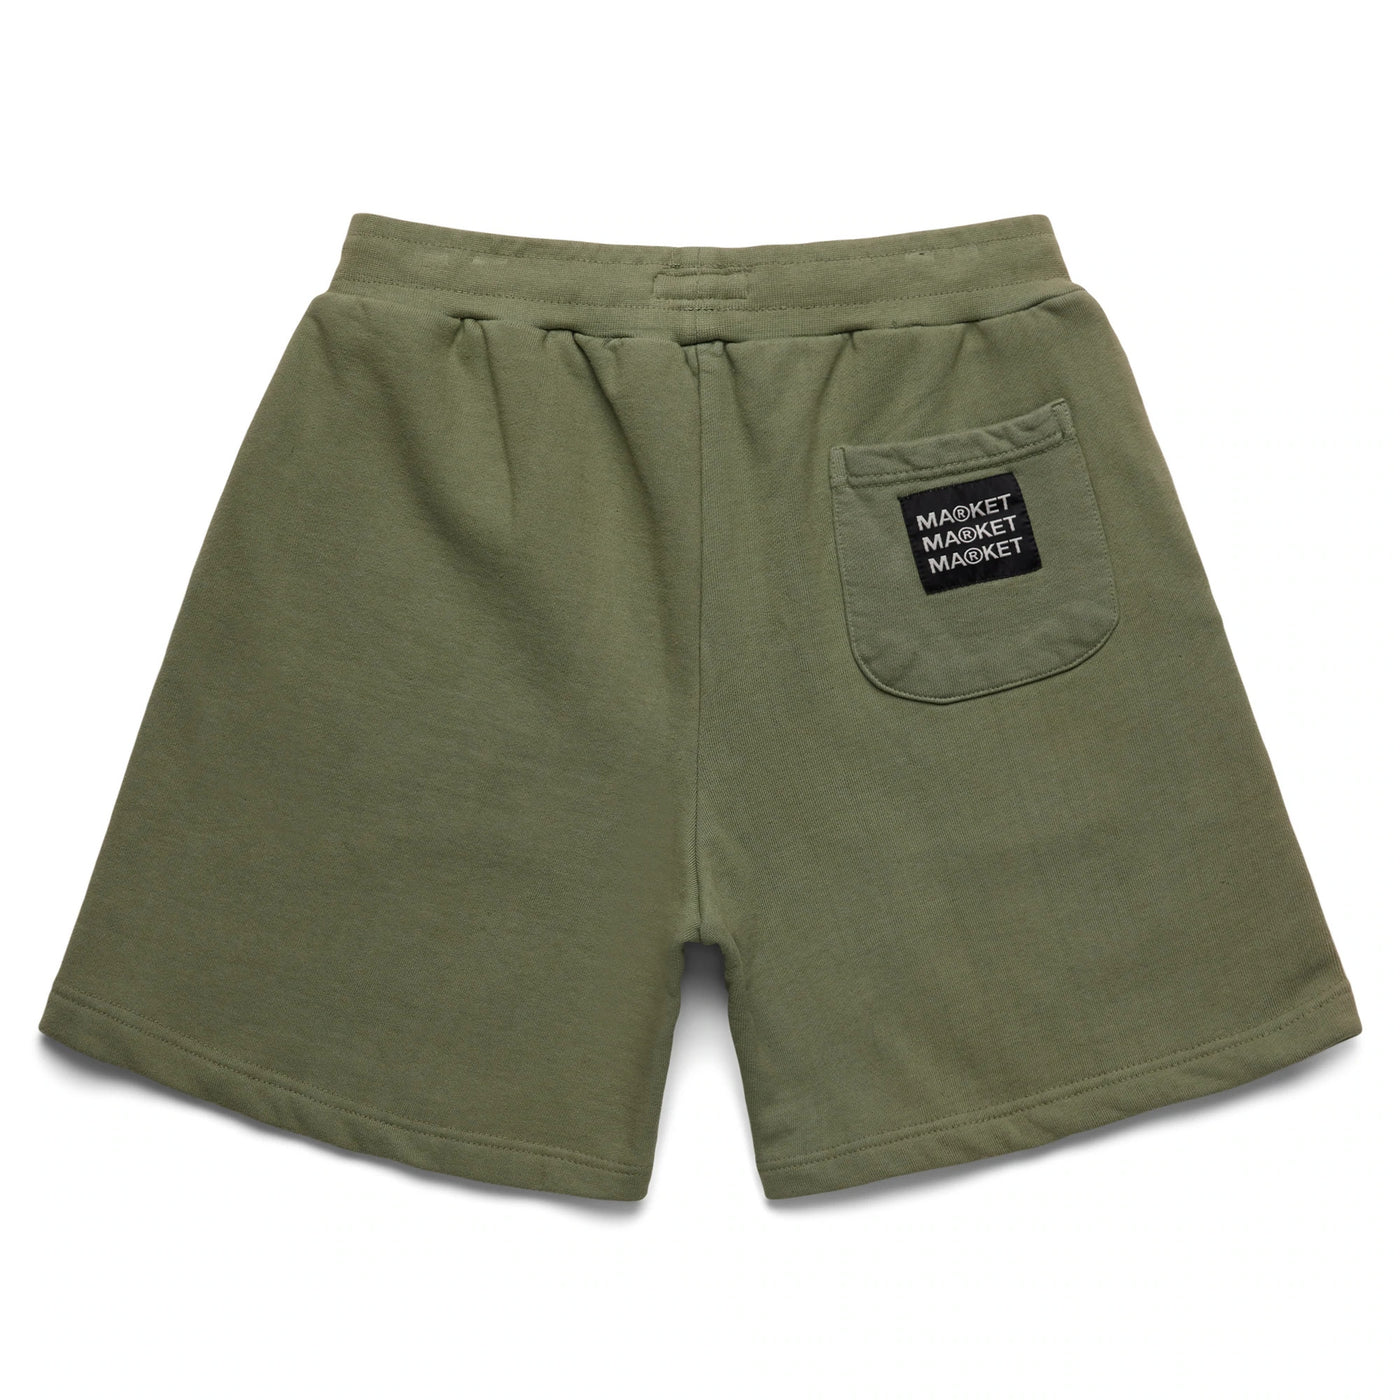 Market Smiley Look At The Bright Side Sweatshorts Sage Green Back